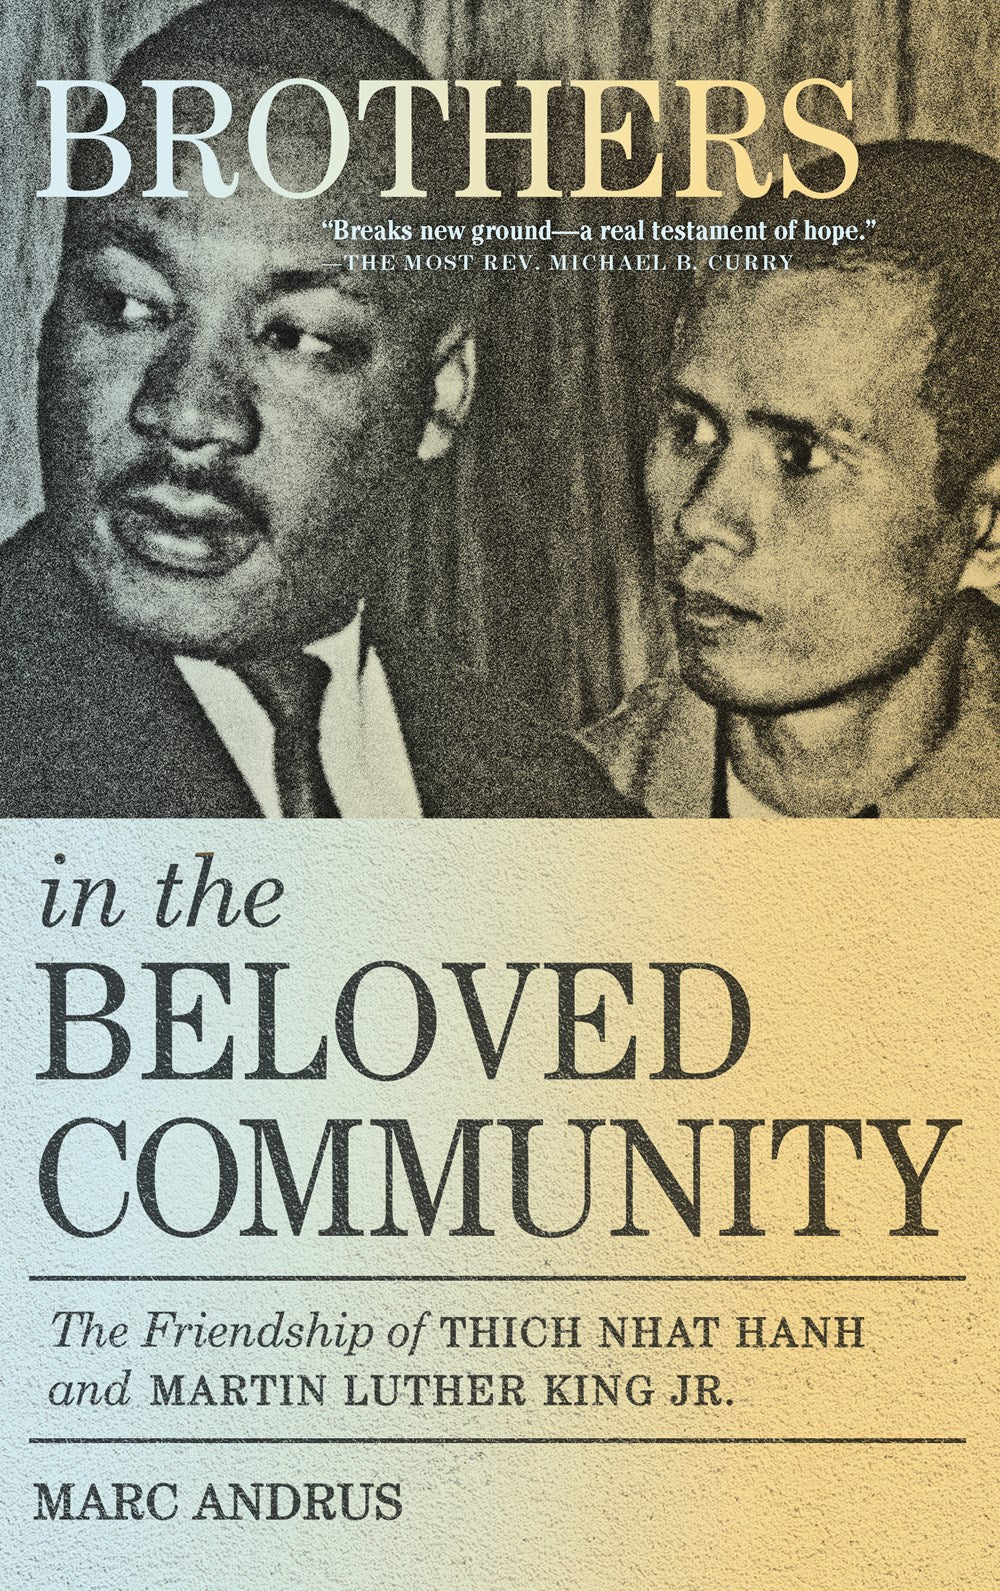 Brothers in the Beloved Community: The Friendship of Thich Nhat Hanh and Martin Luther King Jr.